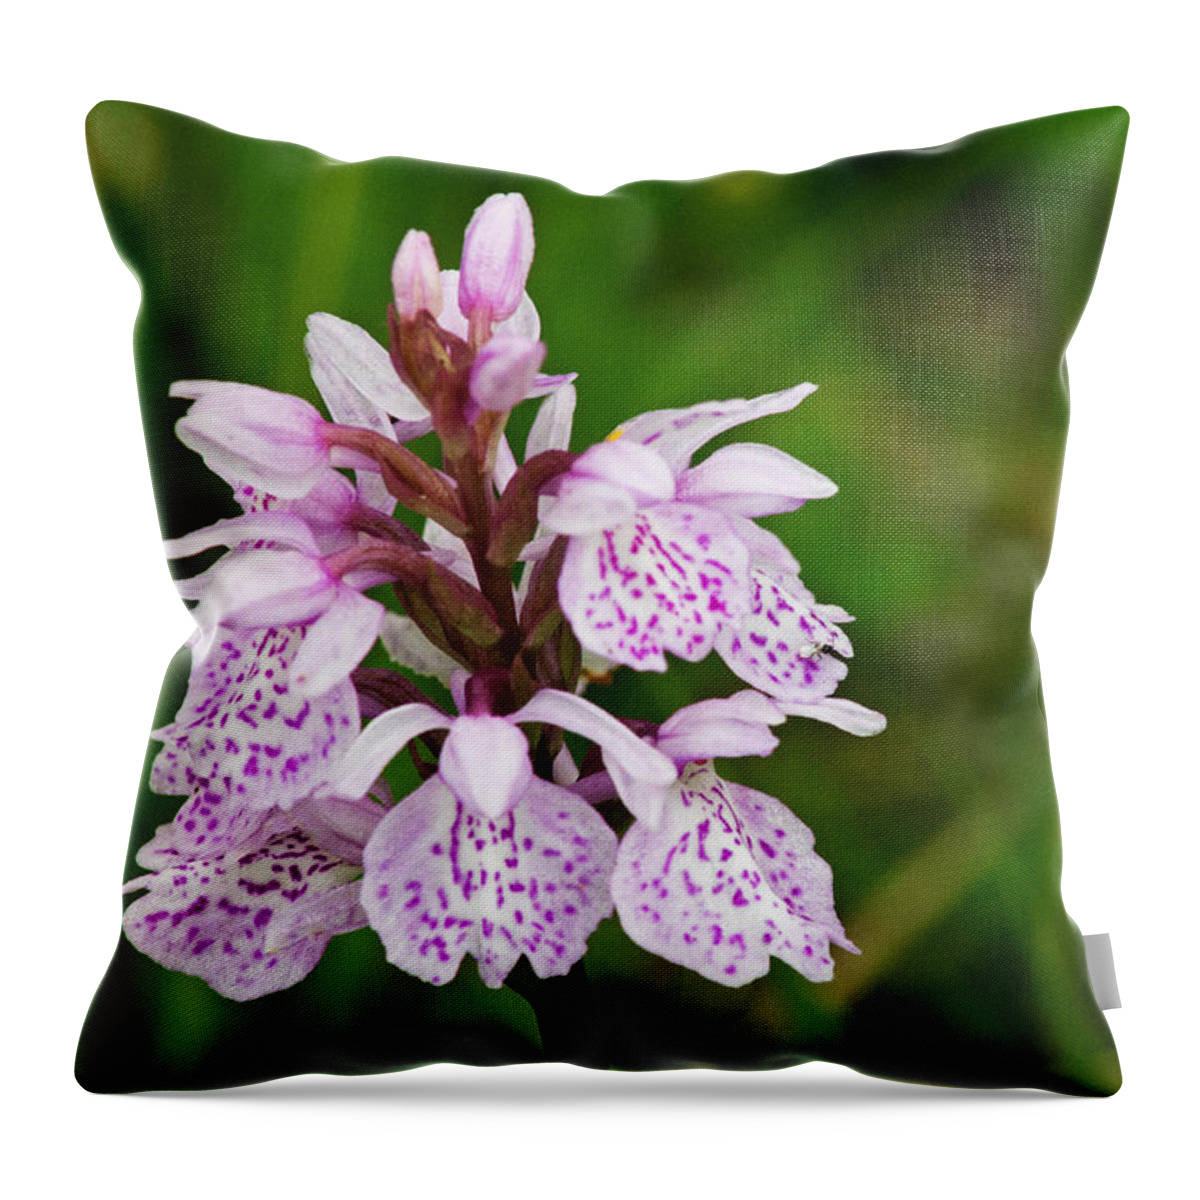 Orchid Throw Pillow featuring the photograph Heath Spotted Orchid by Tony Murtagh